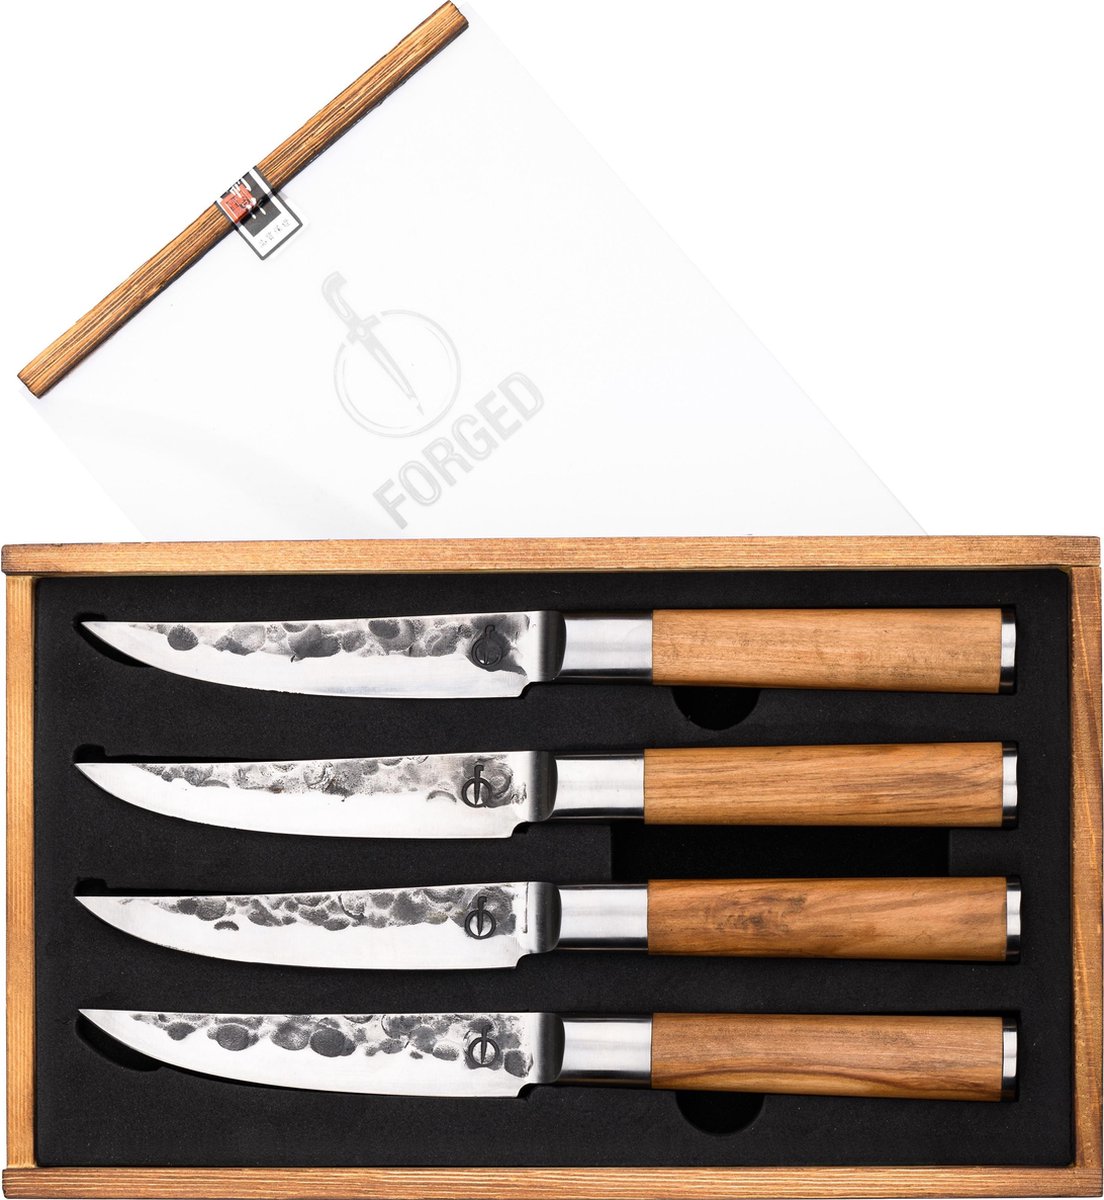 Forged Olive Steakmessenset 4-delig - Olijfhout - In Houten Giftbox | bol